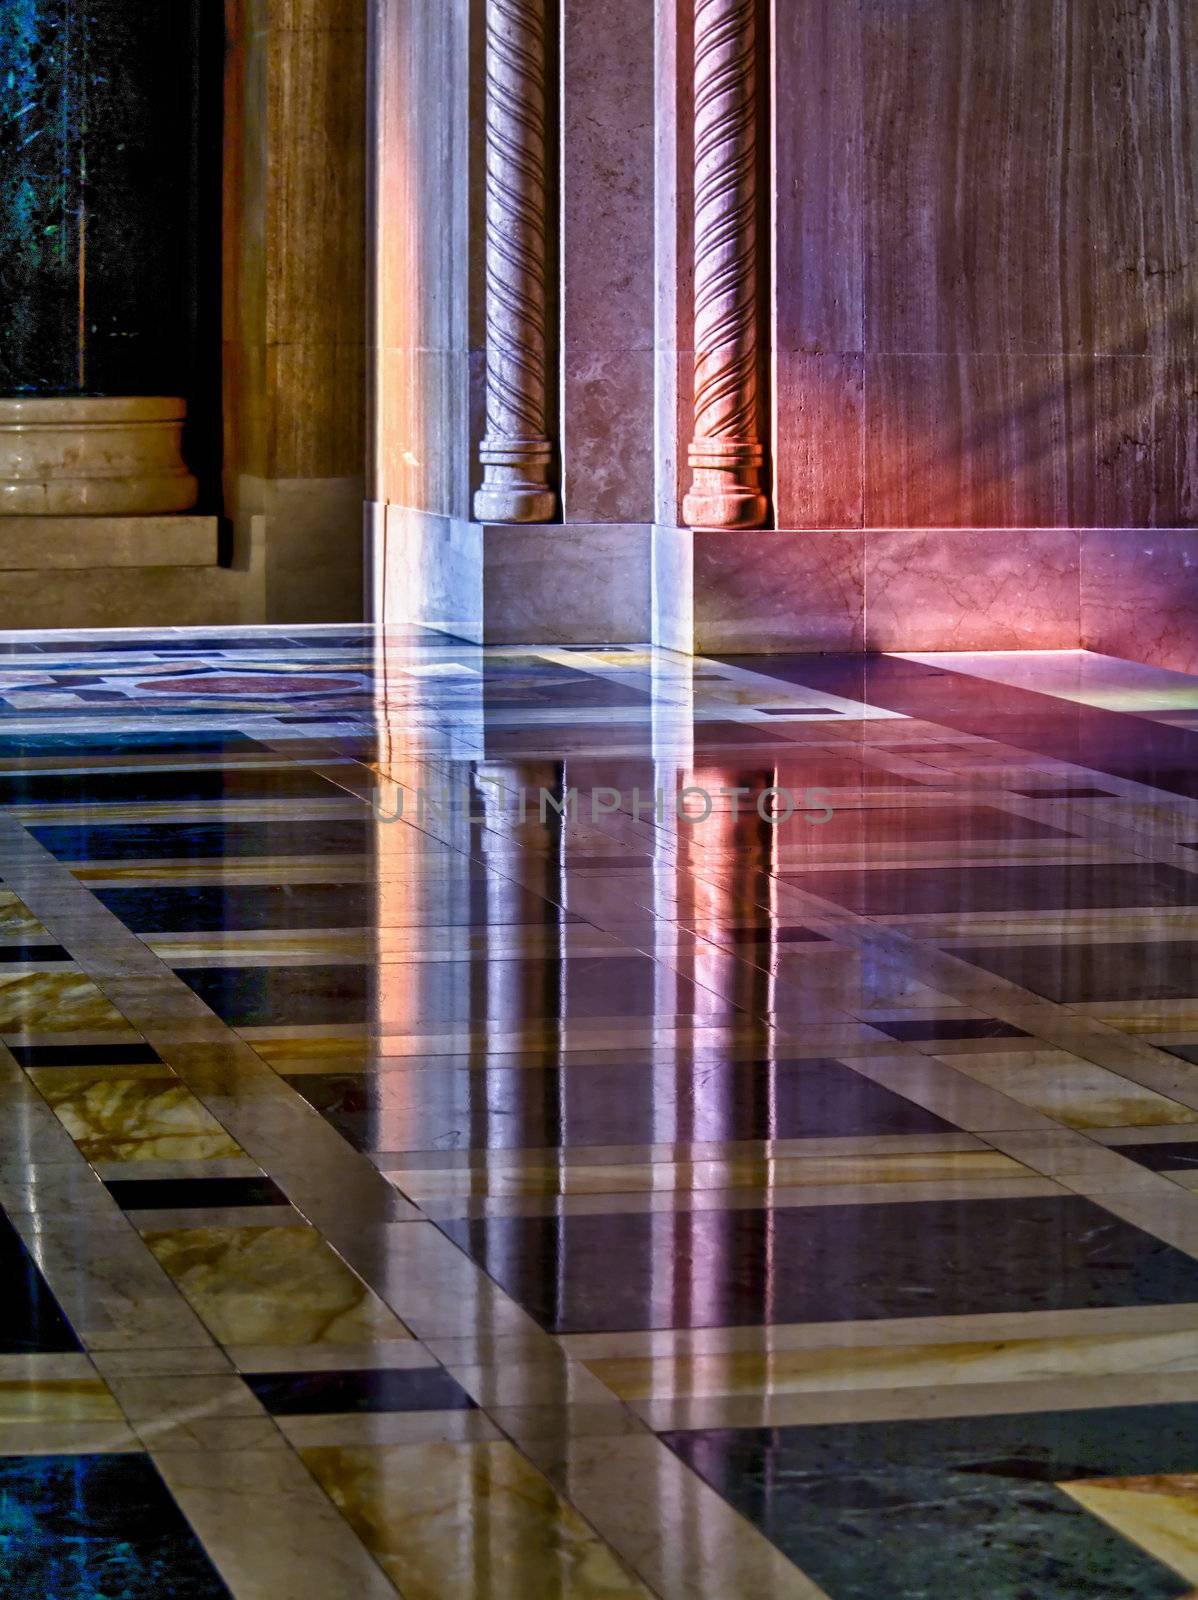 Colorful light from a stained glass window in a cathedral falls on the polished marble of the church illuminating the carved pillars and reflecting in floor